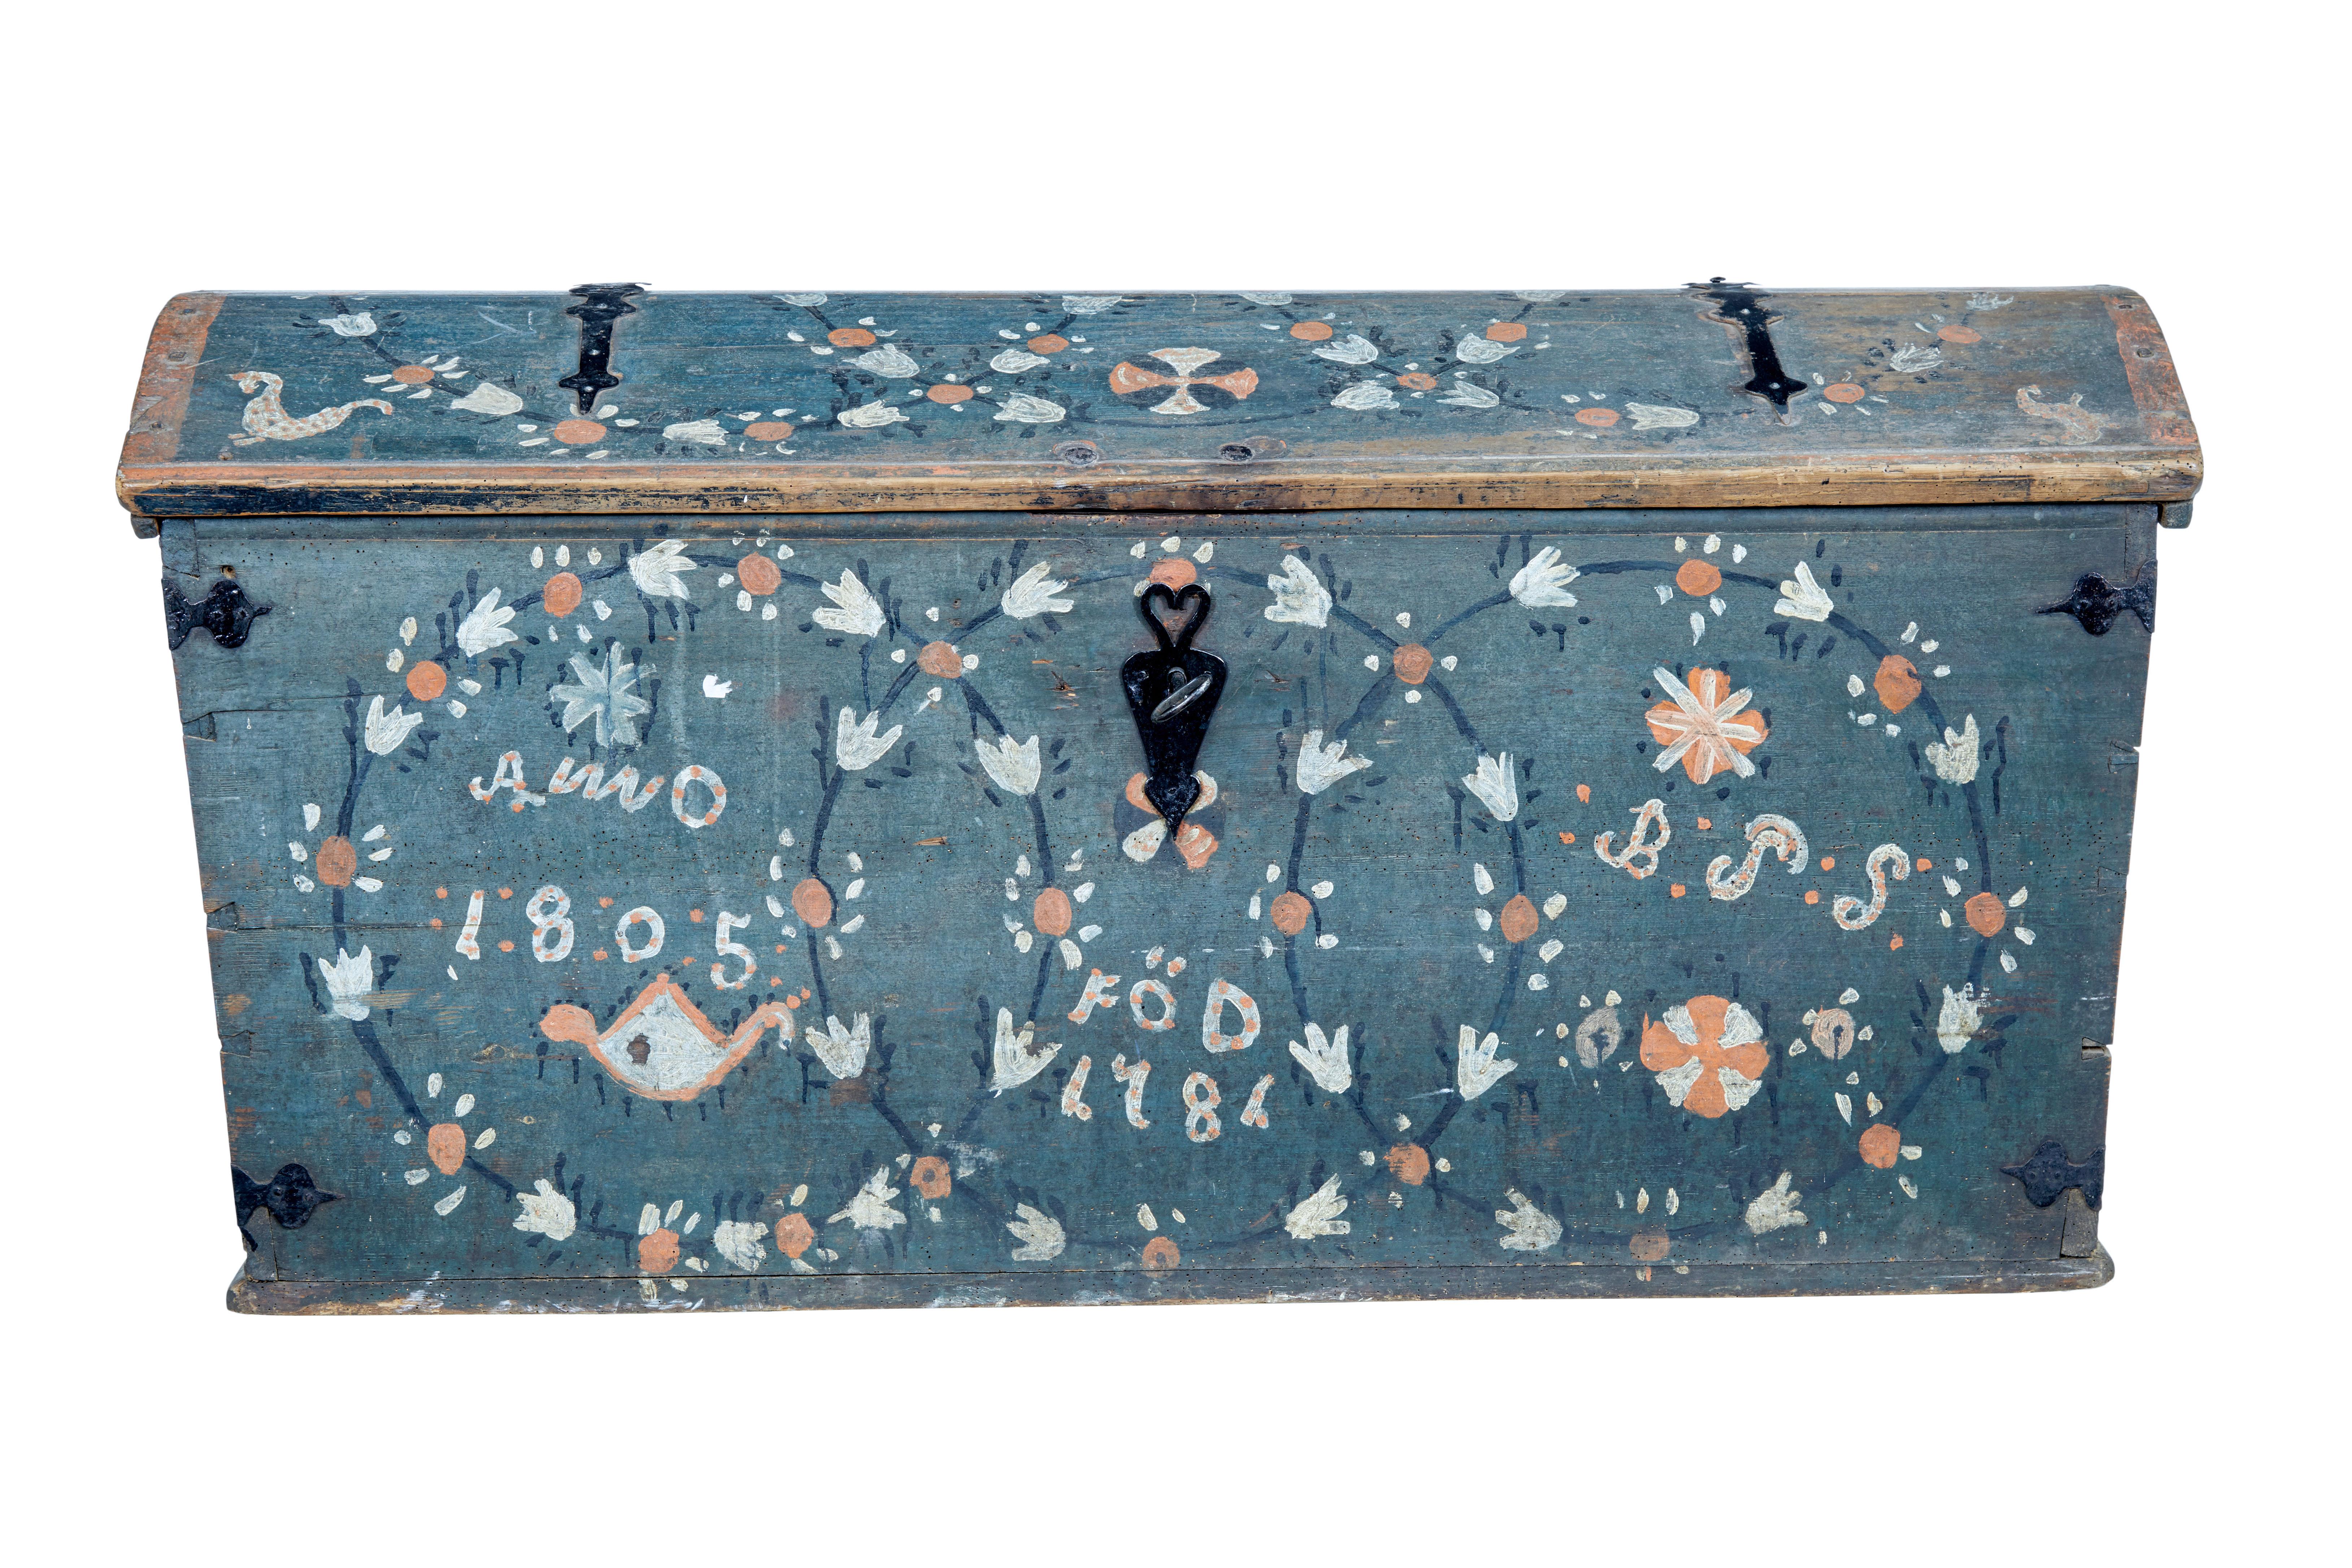 Swedish 19th century folk art hand painted dome top coffer circa 1805.

Traditional hand painted coffer in solid pine. Hand decorated with 2 dates and the initials of b.J.S, surrounded by over lapping wreaths. Top surface is also painted in the